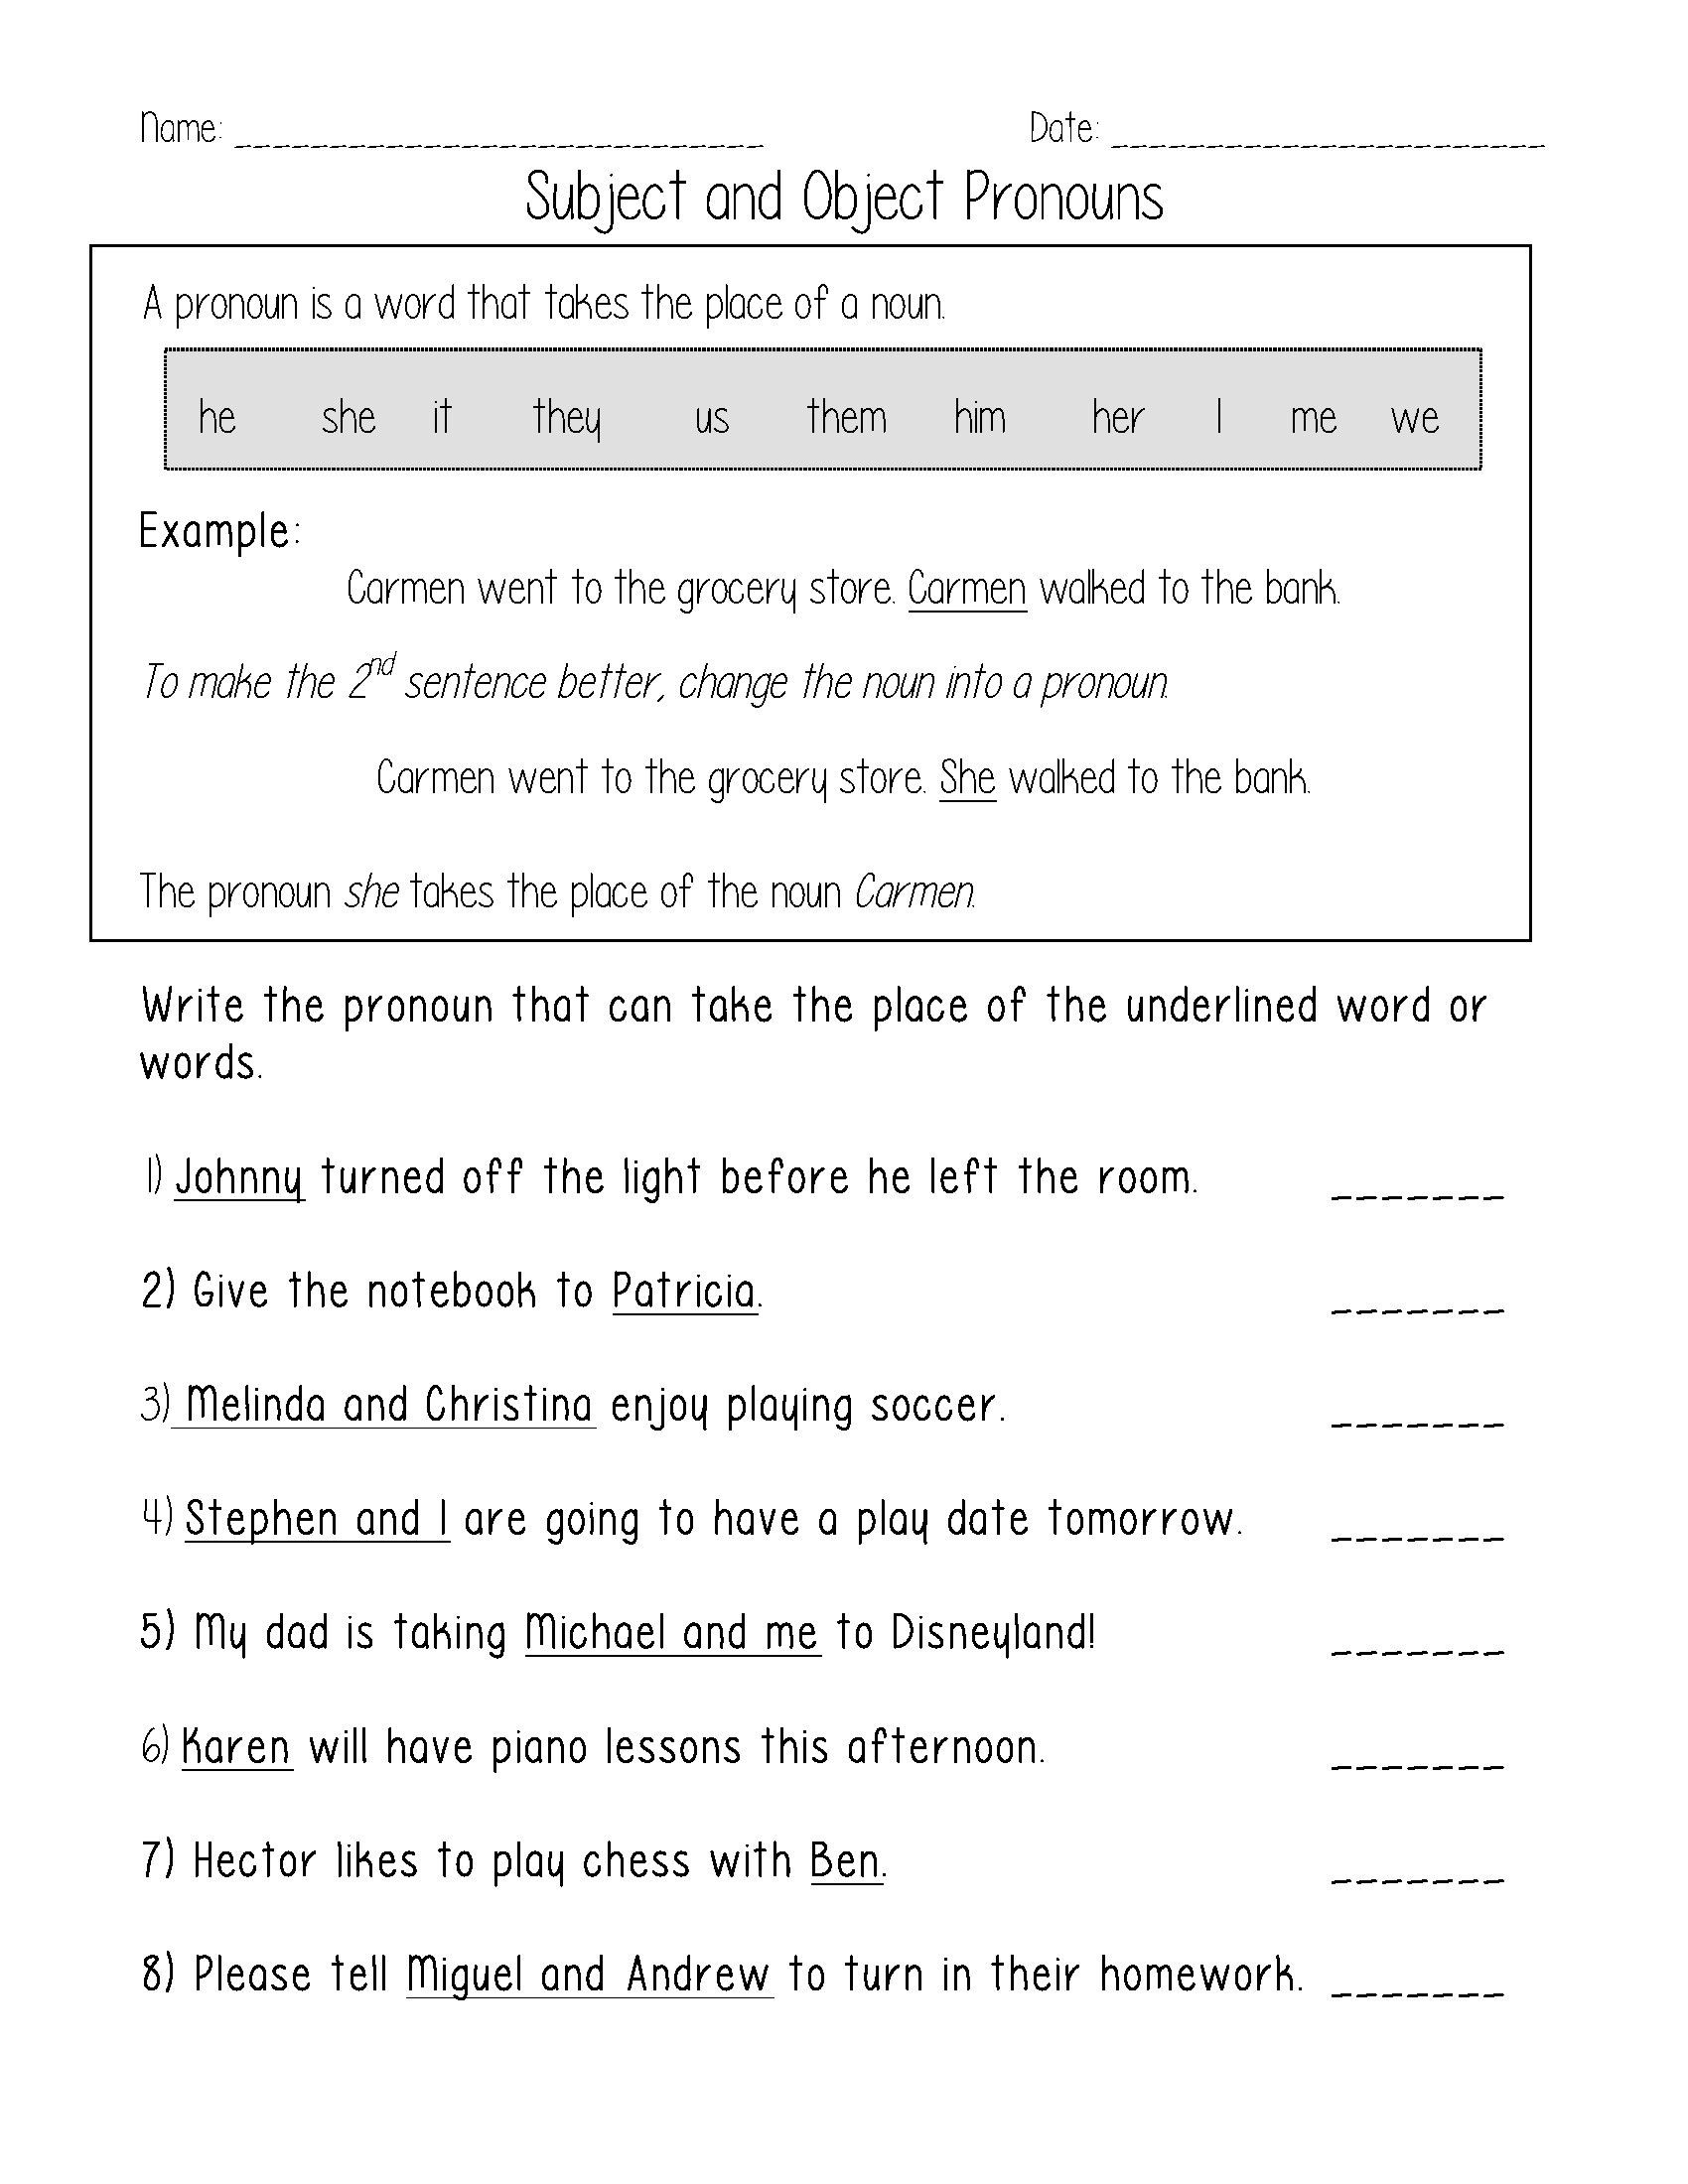 Pronoun Worksheet for 2nd Grade 2nd Grade Esl Worksheet Valid Subject and Object Pronouns